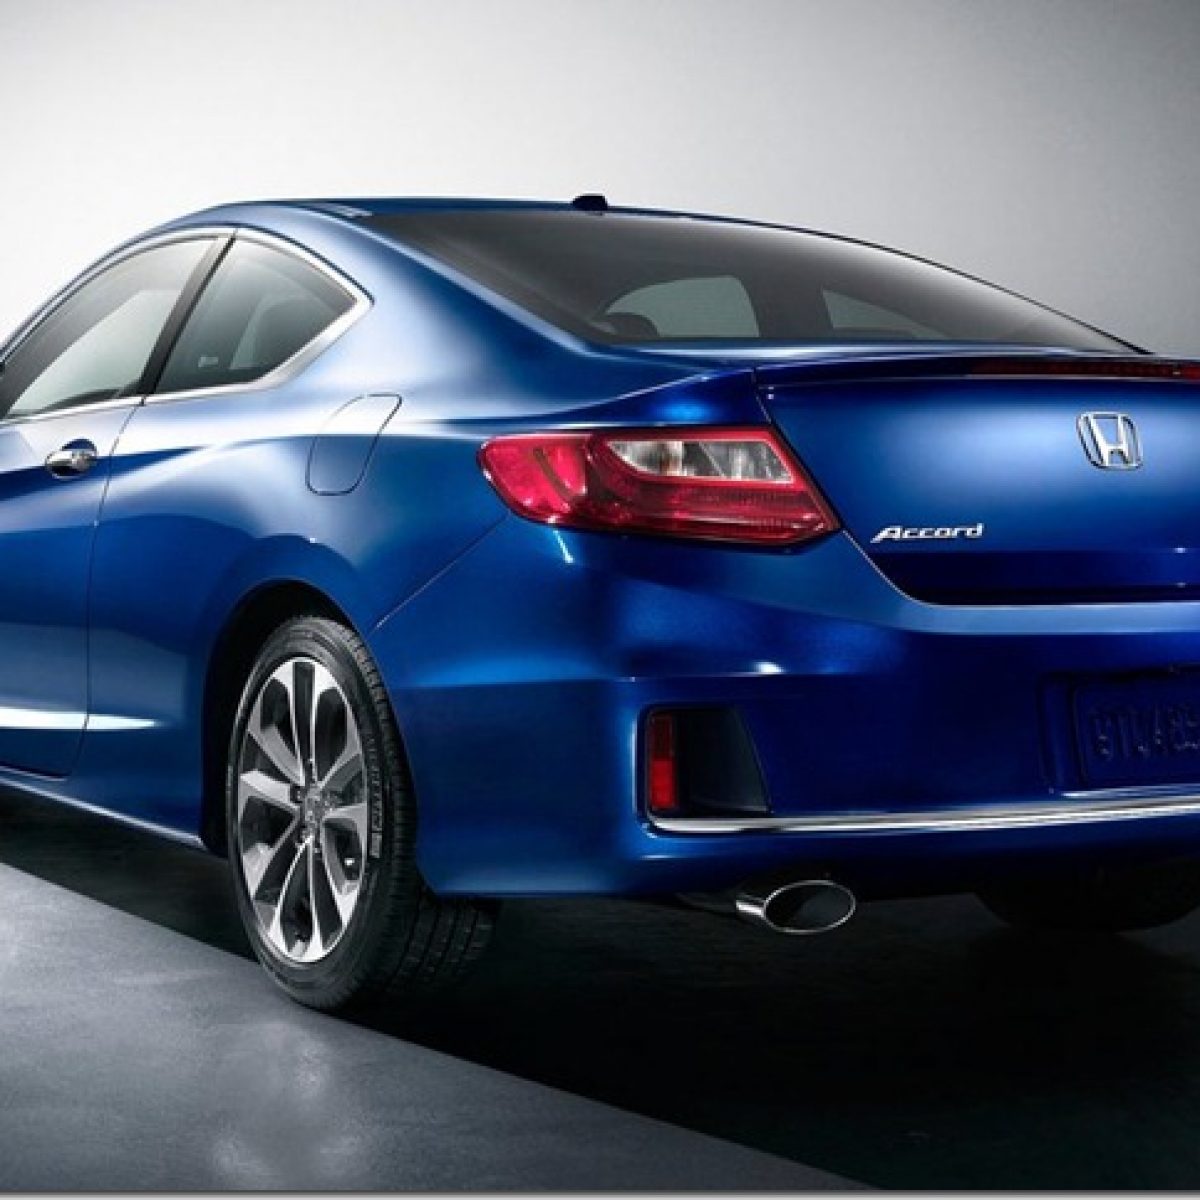 2013 Honda Accord Sedan And Coupe Official Pictures Details